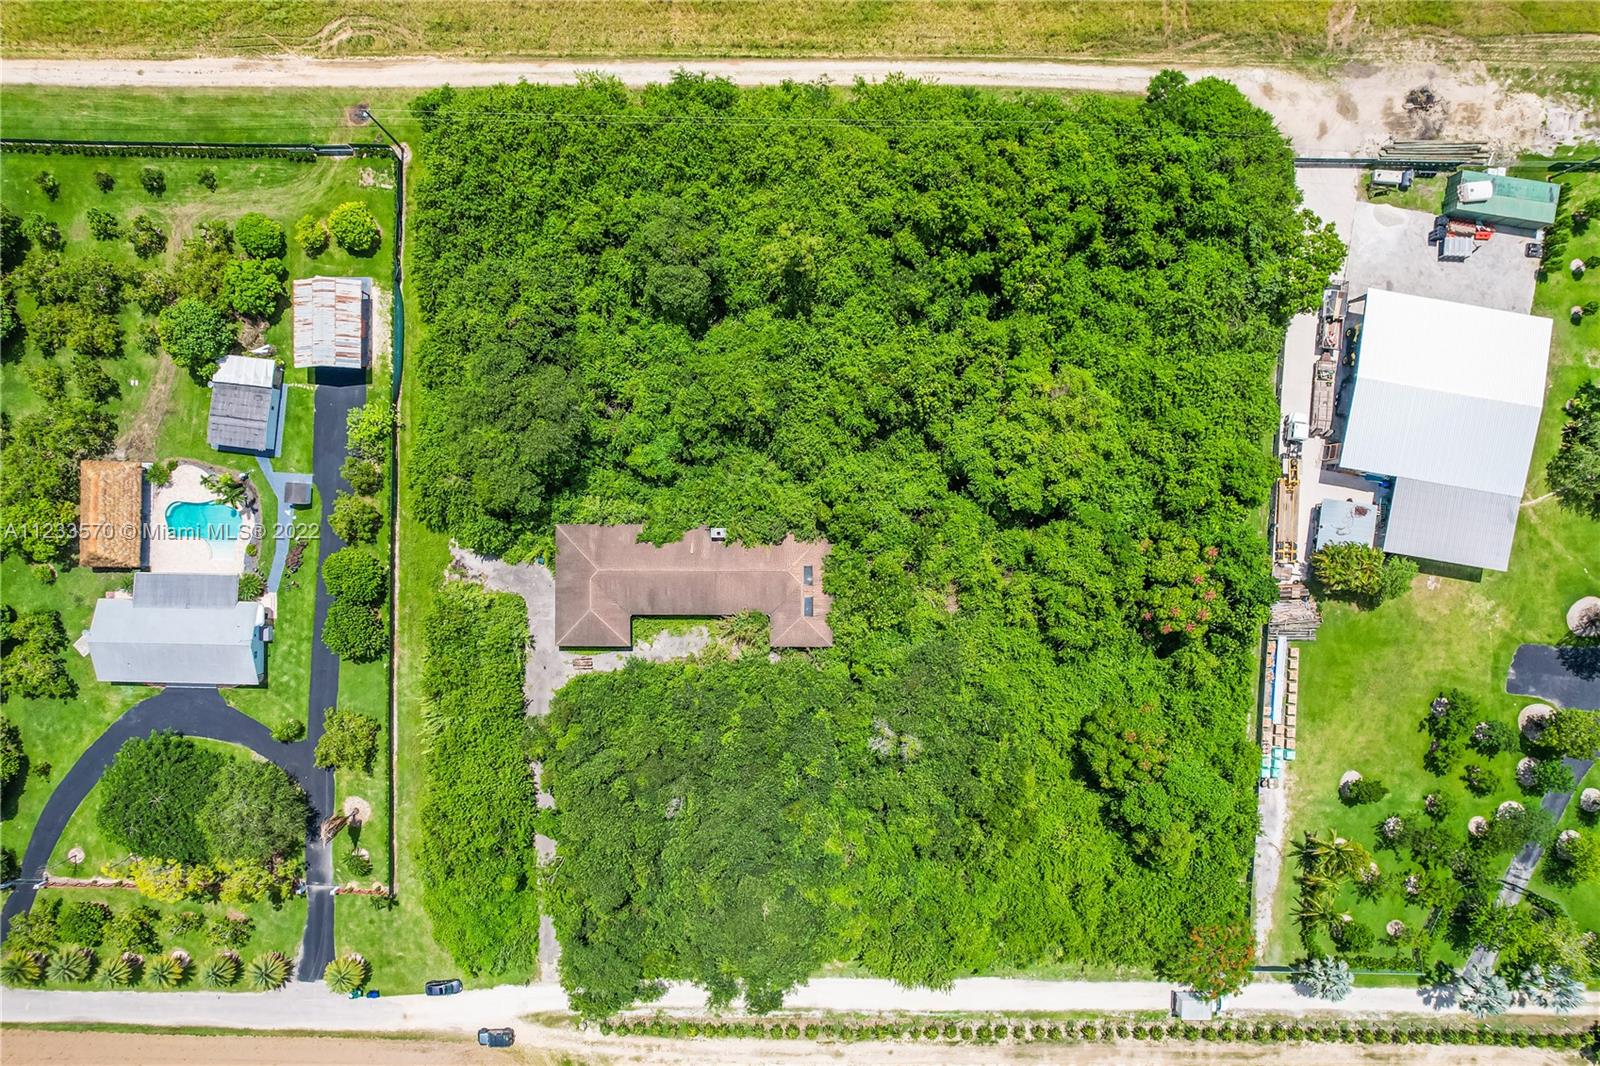 Take advantage of the investment opportunity of a lifetime! The home itself has strong bones and sits on a piece of undisturbed, 2+ acre land. With no association, the opportunities this land holds are endless. This home holds a tremendous amount of potential and is already set in a prime location in South Florida; opportunities such as this don't come around often! Great schools in the area, close to freeways, restaurants and shops.